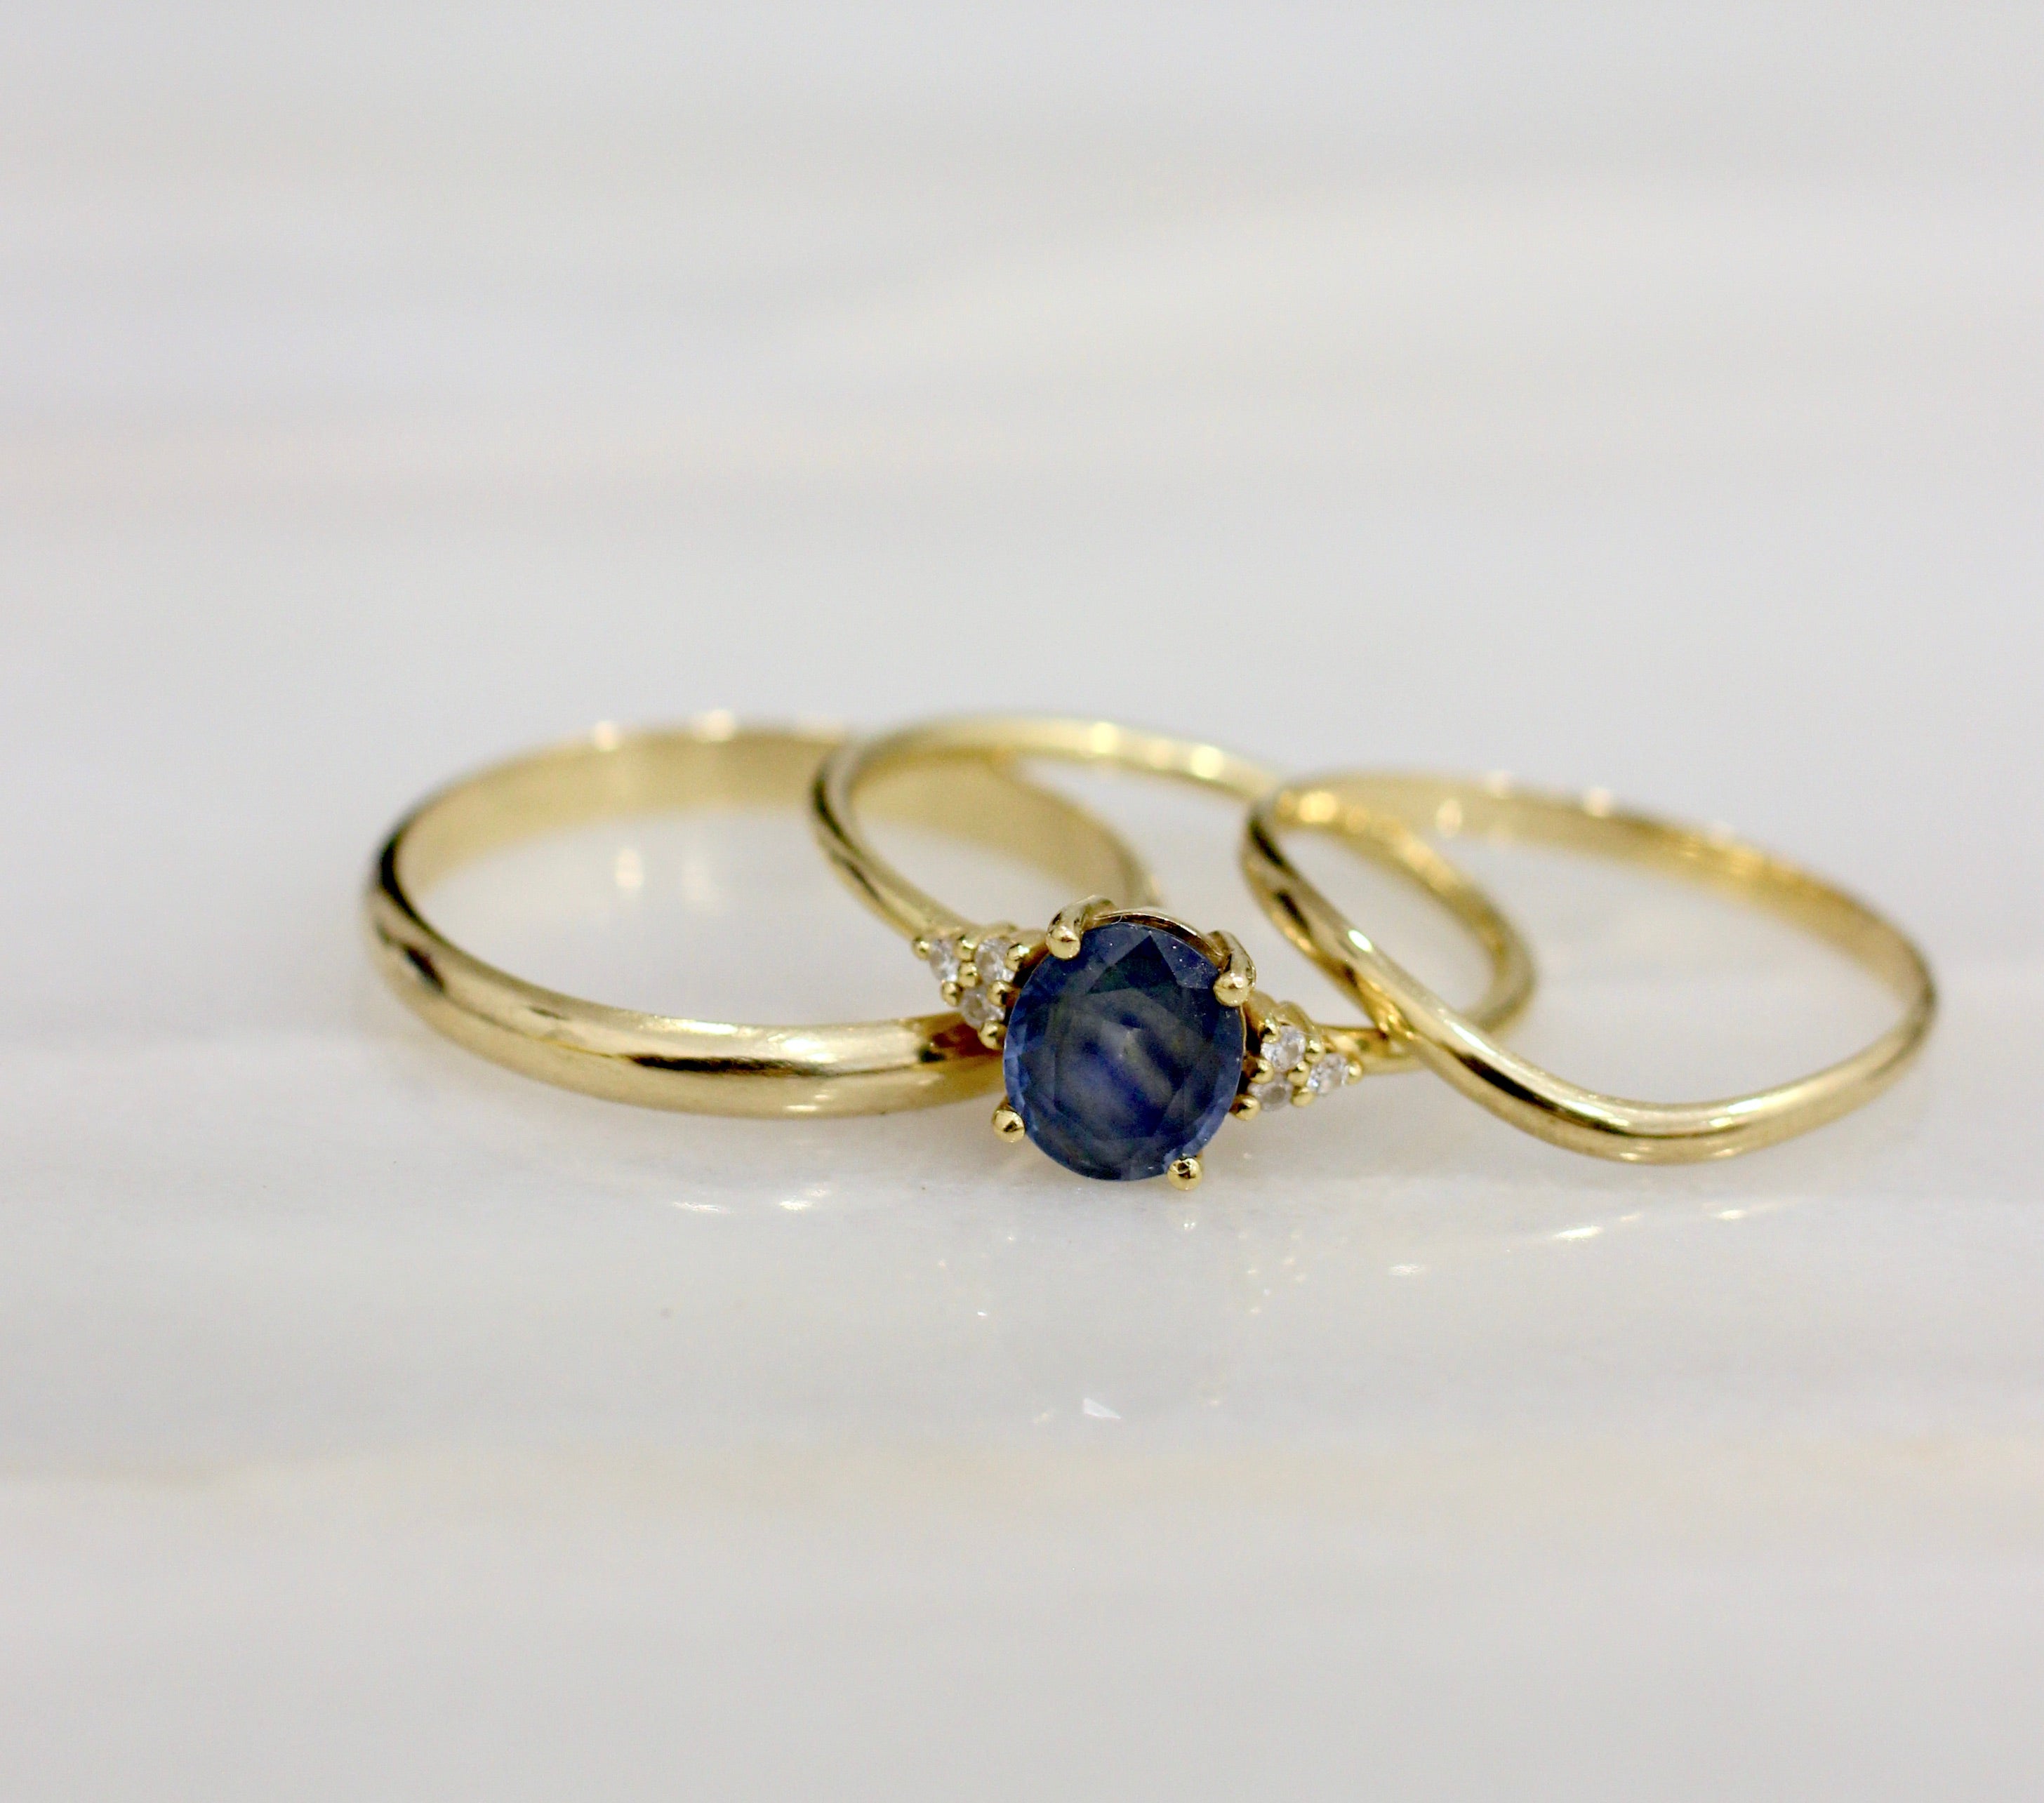 Two Yellow Gold wedding rings and an engagement ring with a Sapphire placed on a marble surface. 